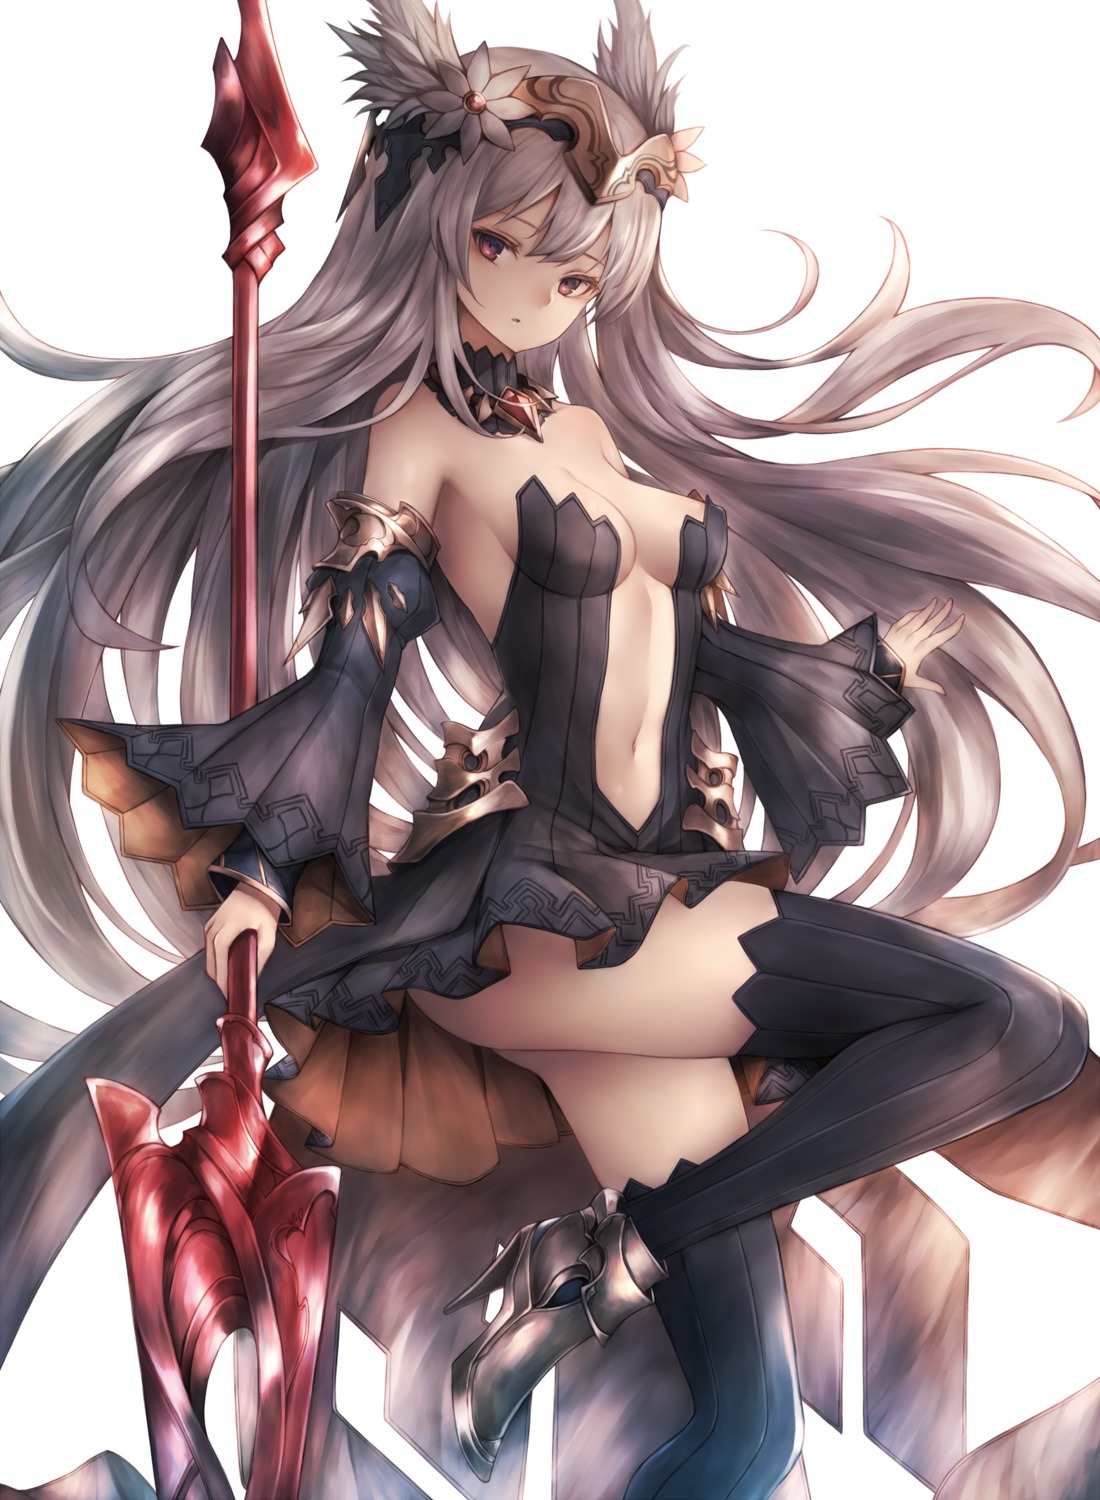 armor ass cleavage dress heels no_bra snm_(sunimi) thighhighs weapon